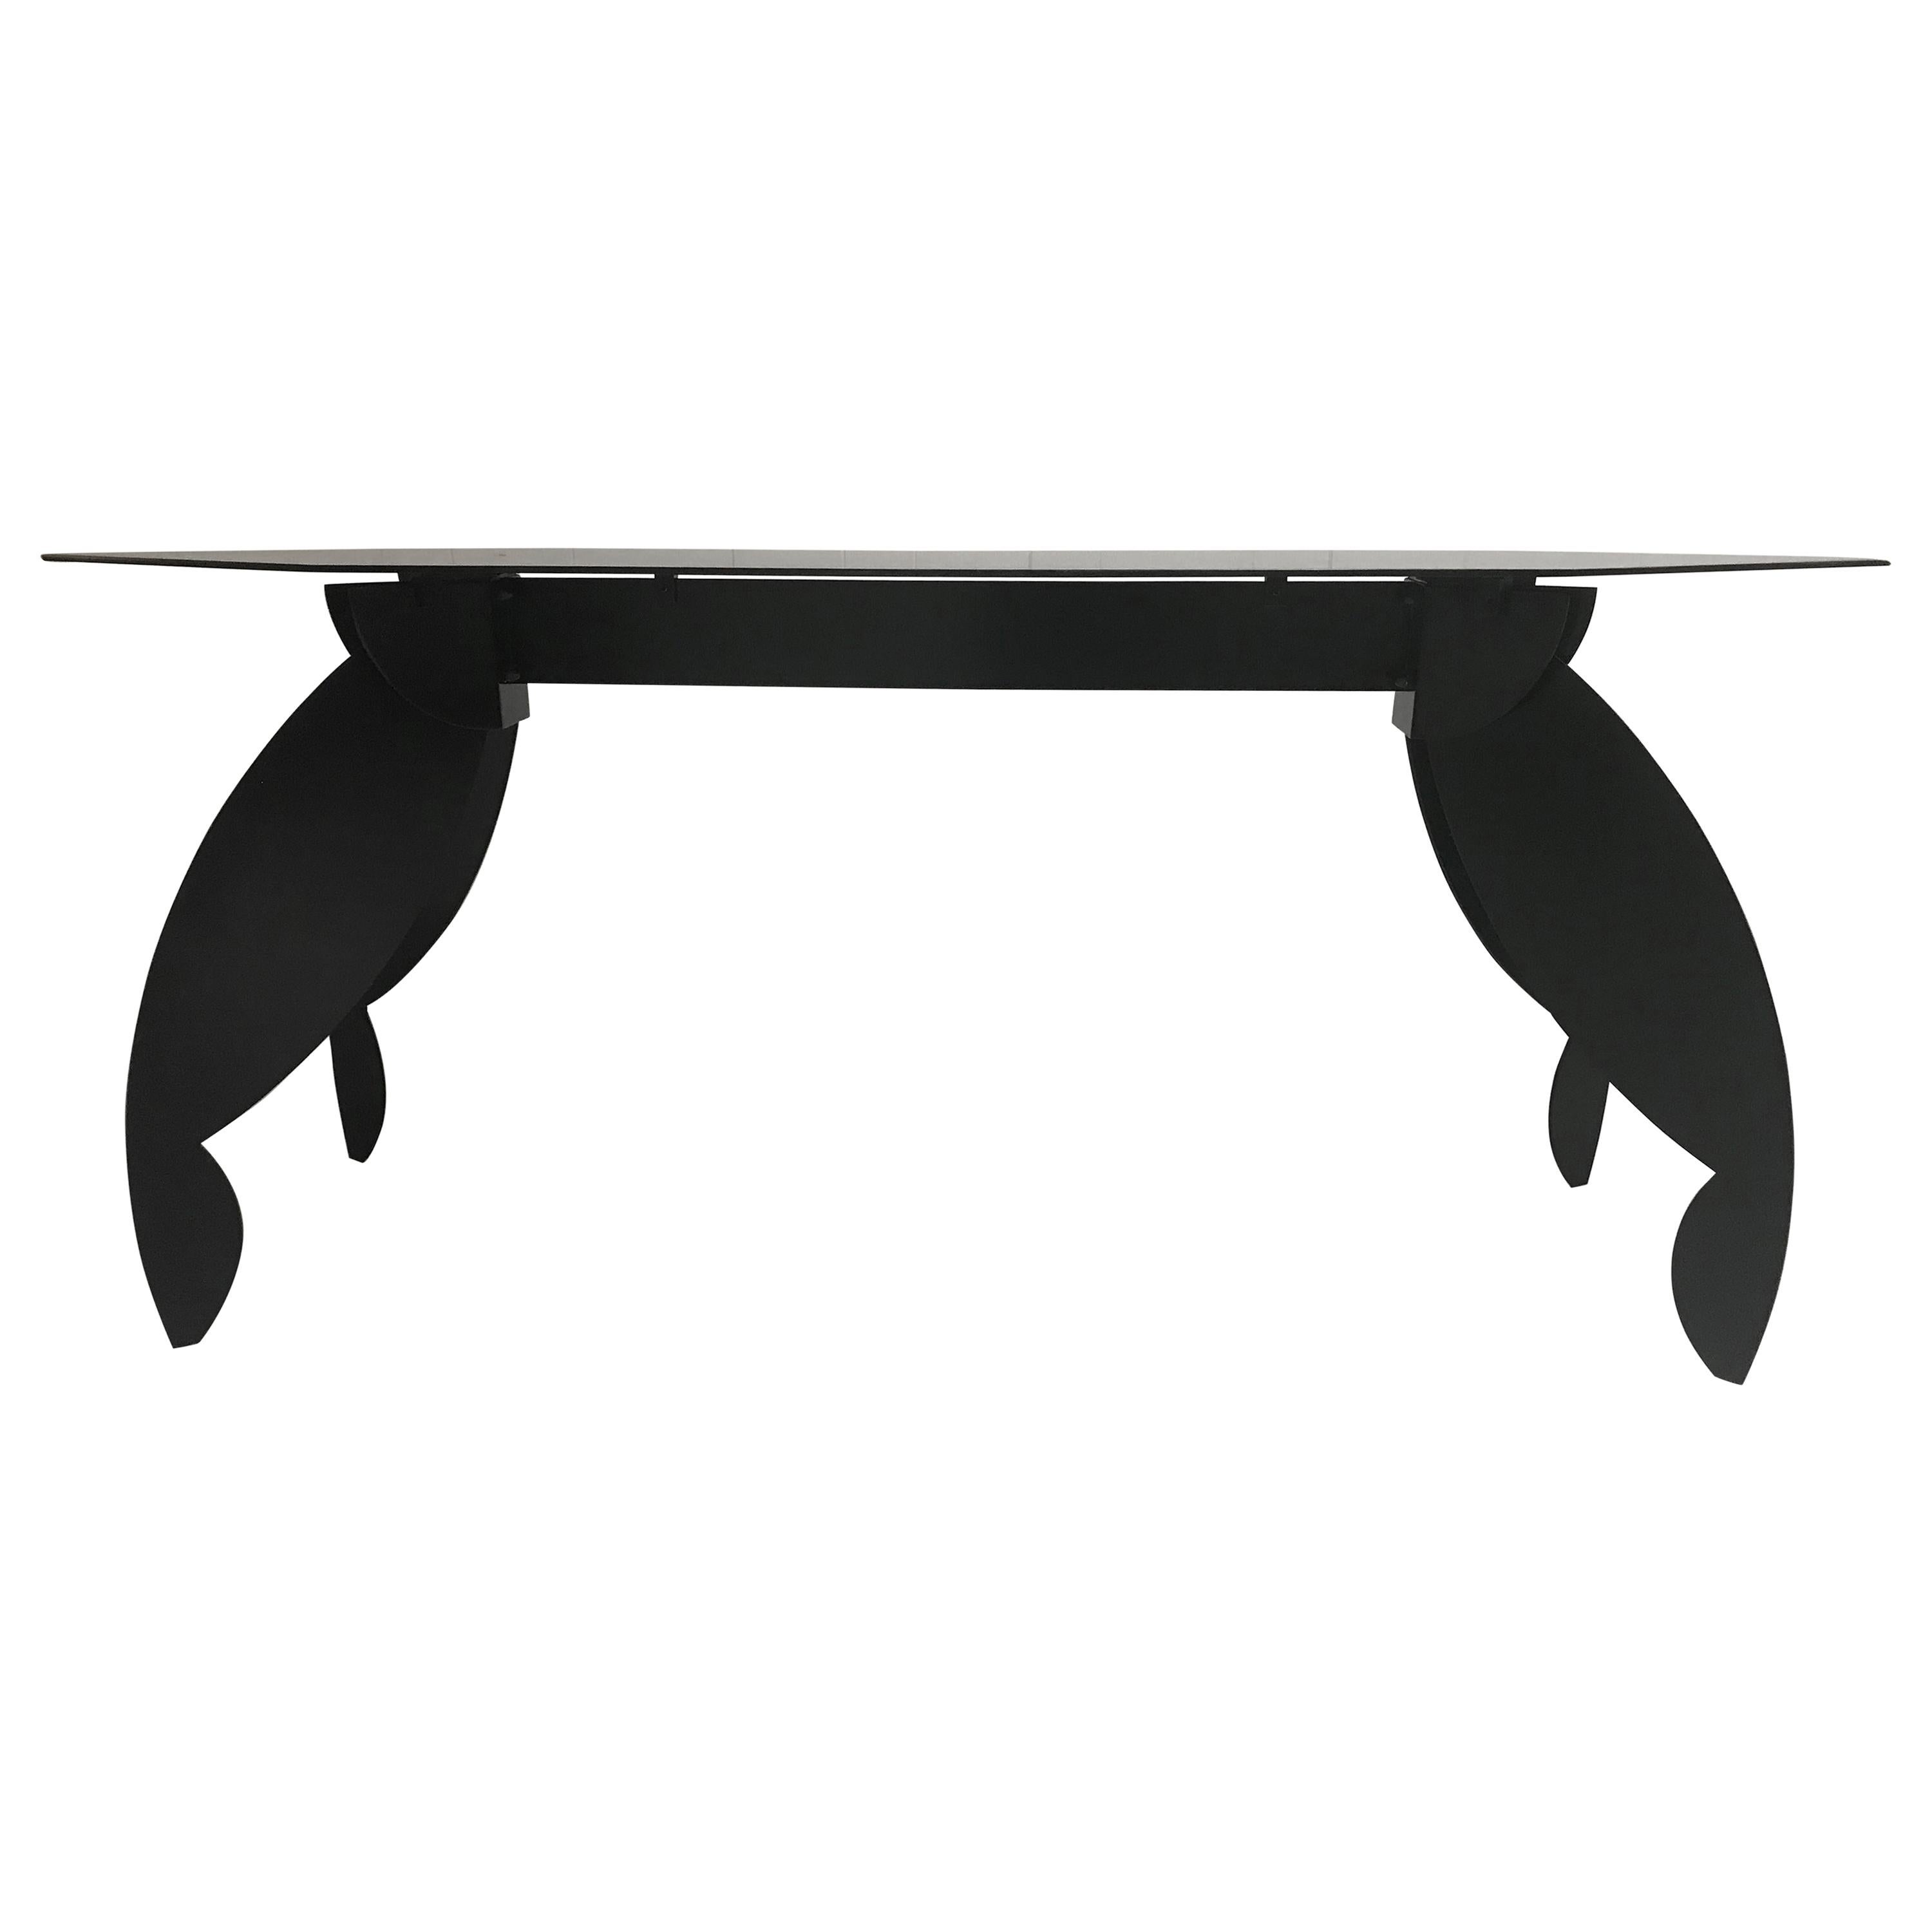 Architectural Black Lacquered Steel Console For Sale